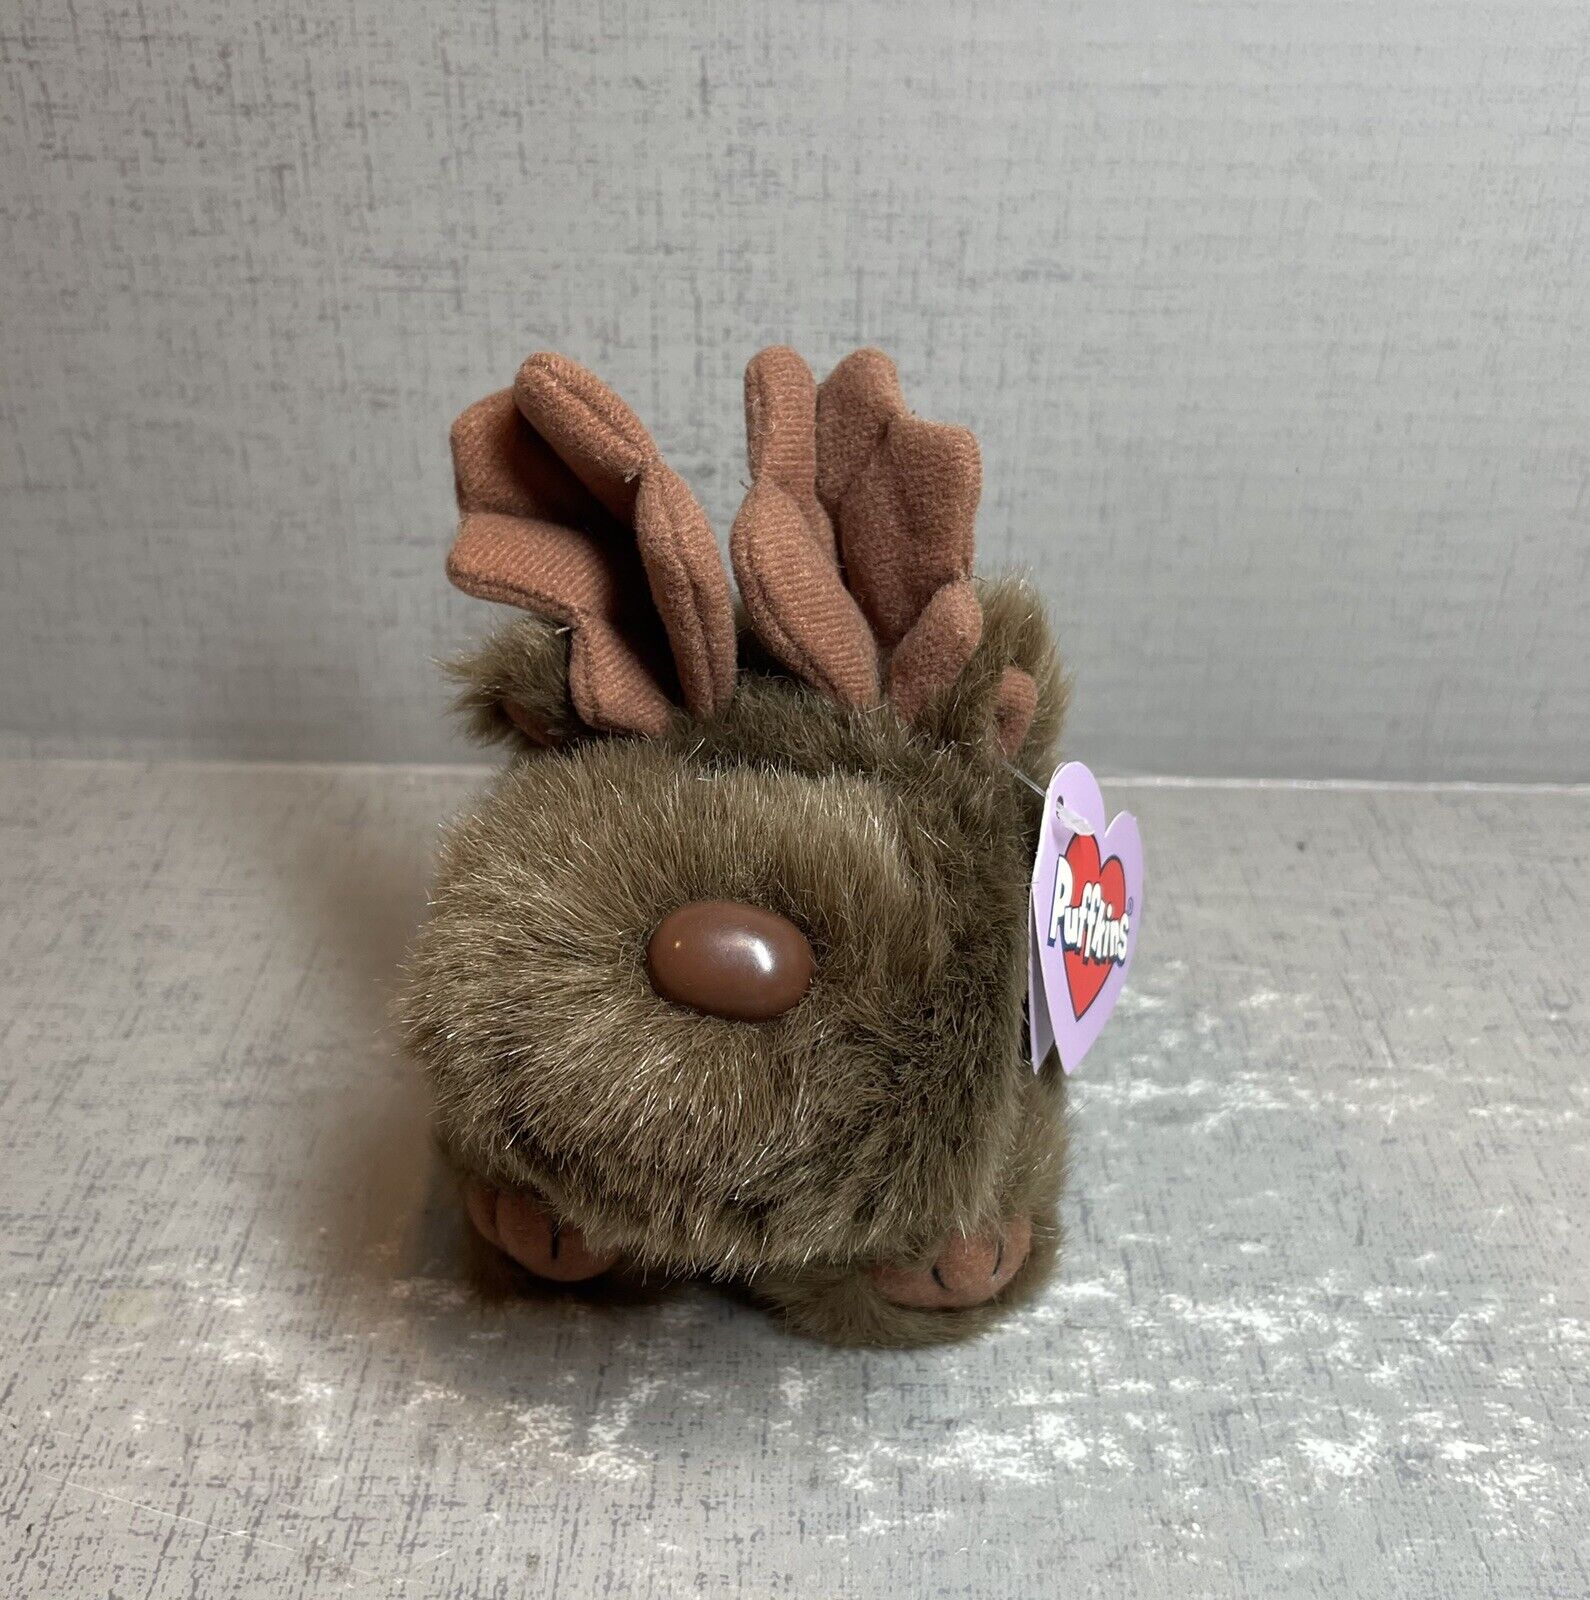 Puffkins Gus the Moose with Antlers Bean Bag Plush 1994 5